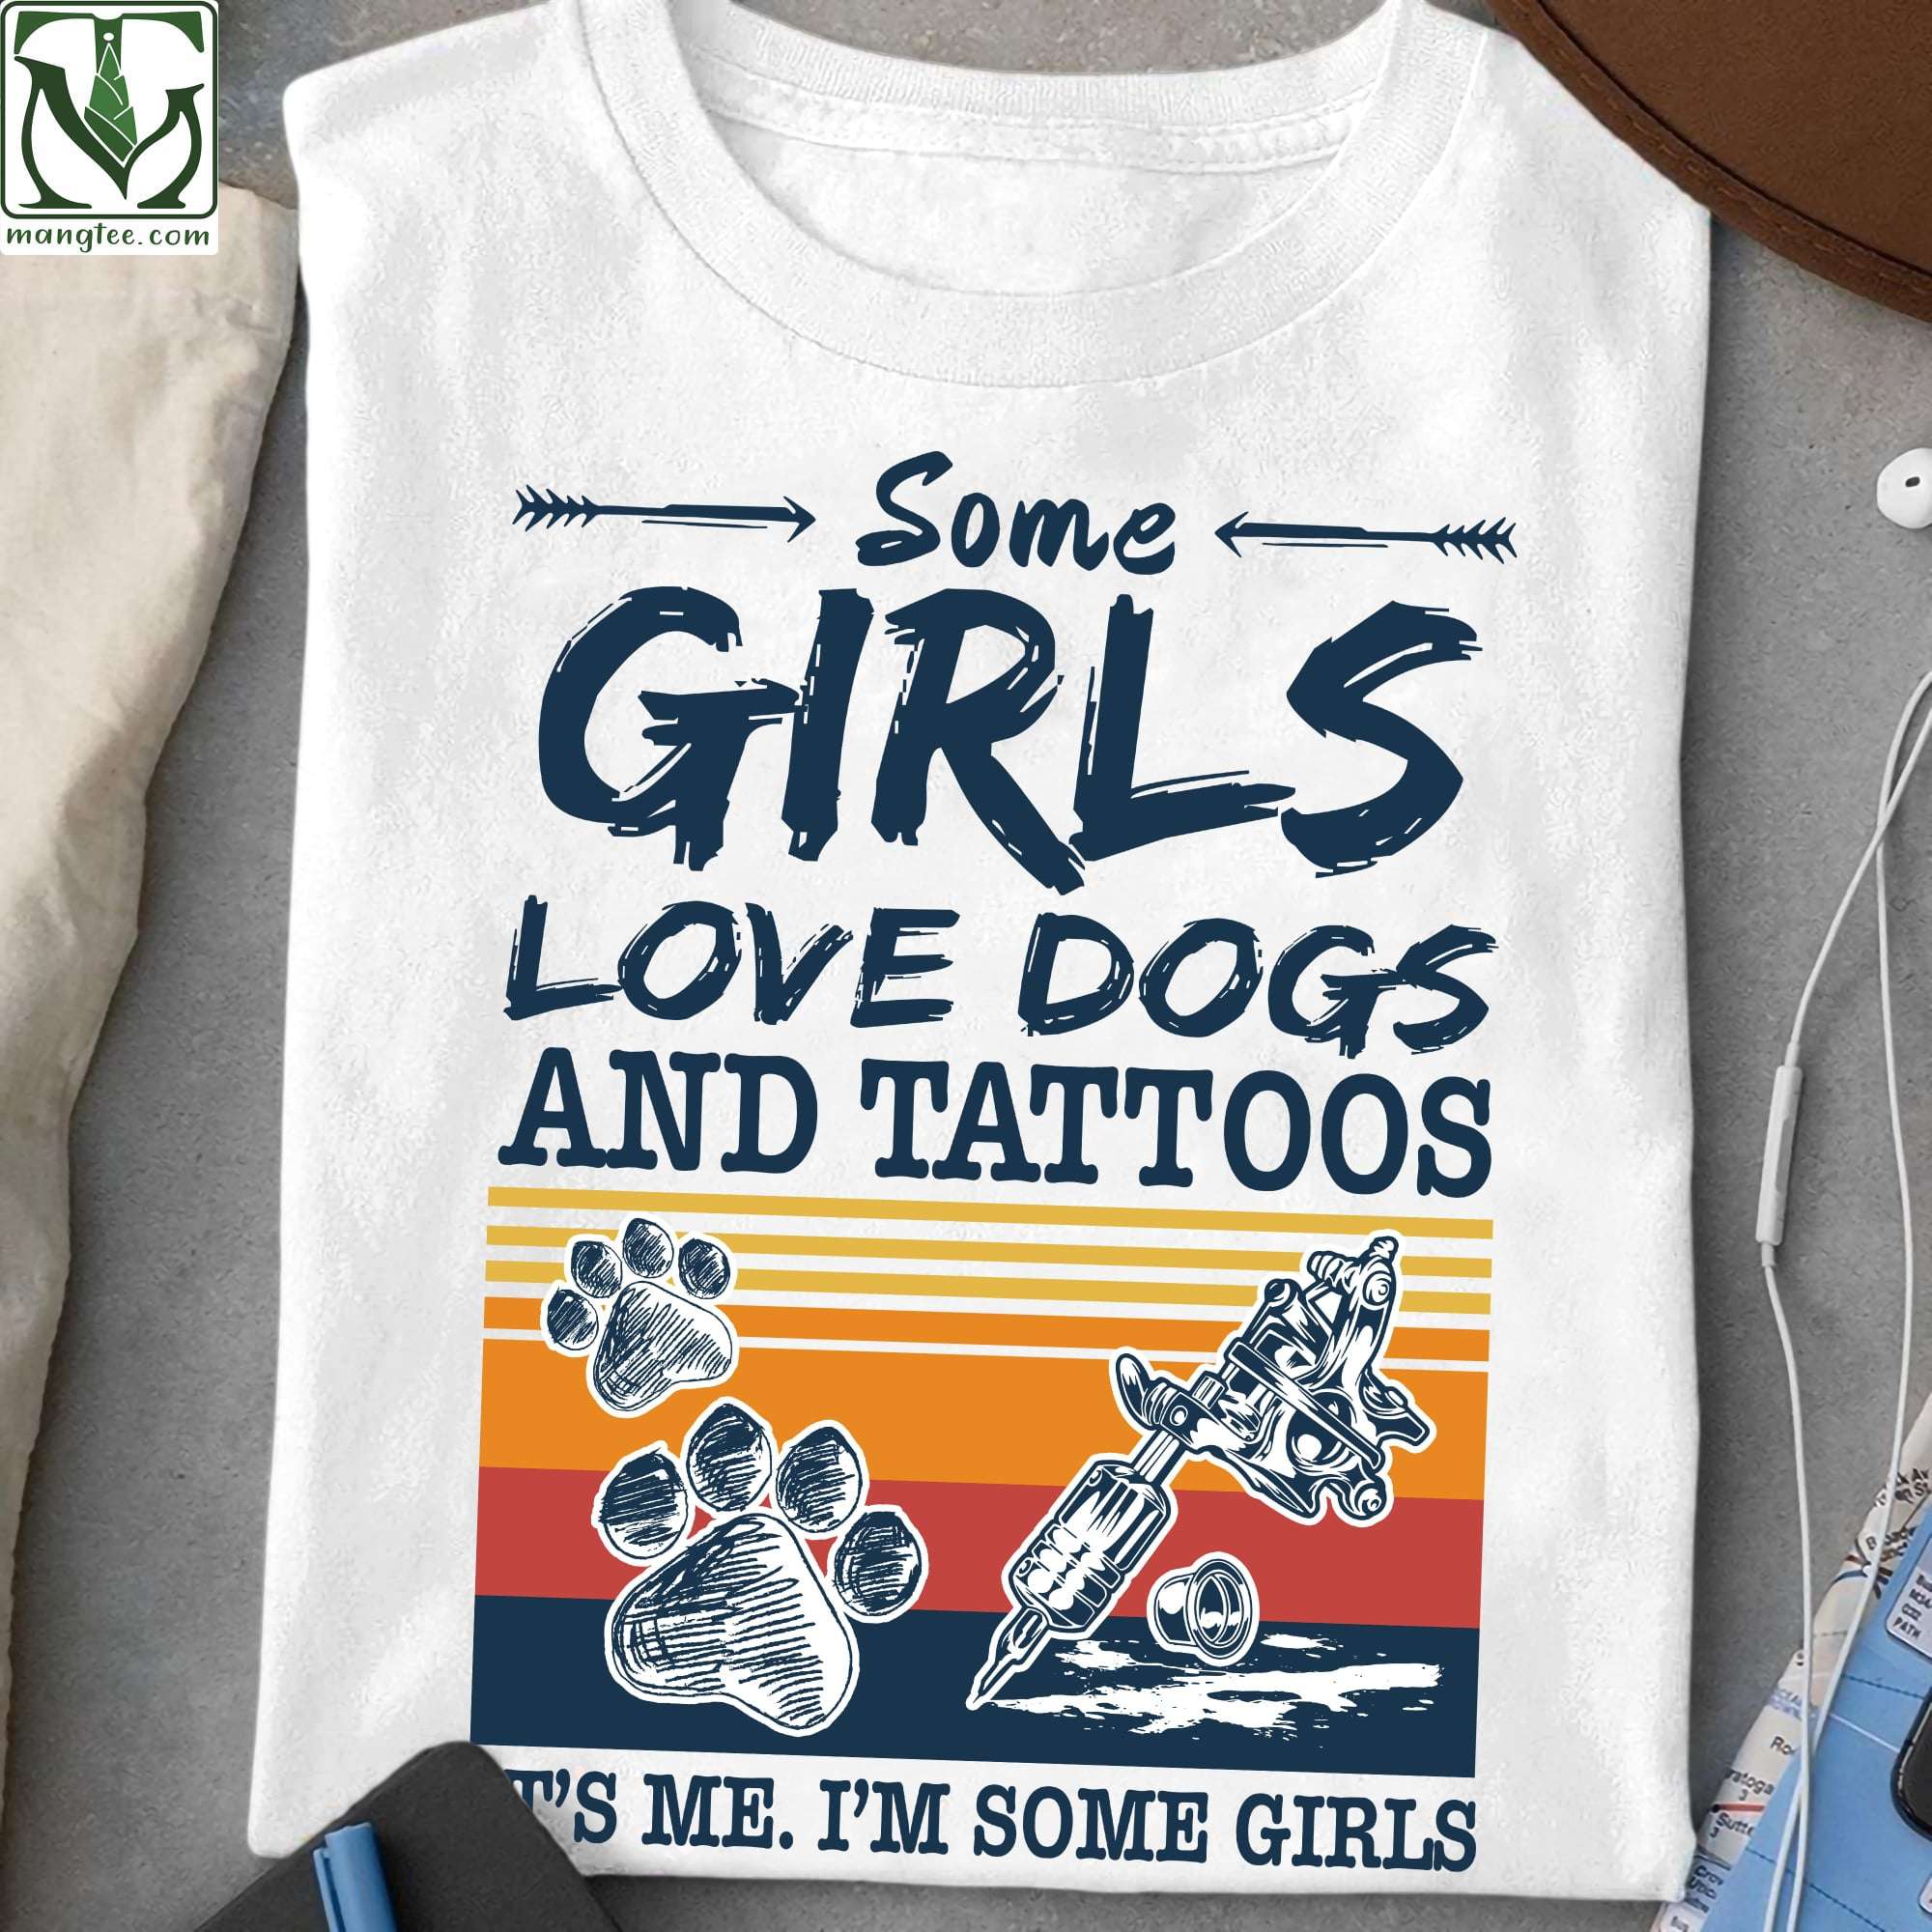 Tattoo Tools Dogs - Some girls love dogs and tattoos it's me i'm some girls